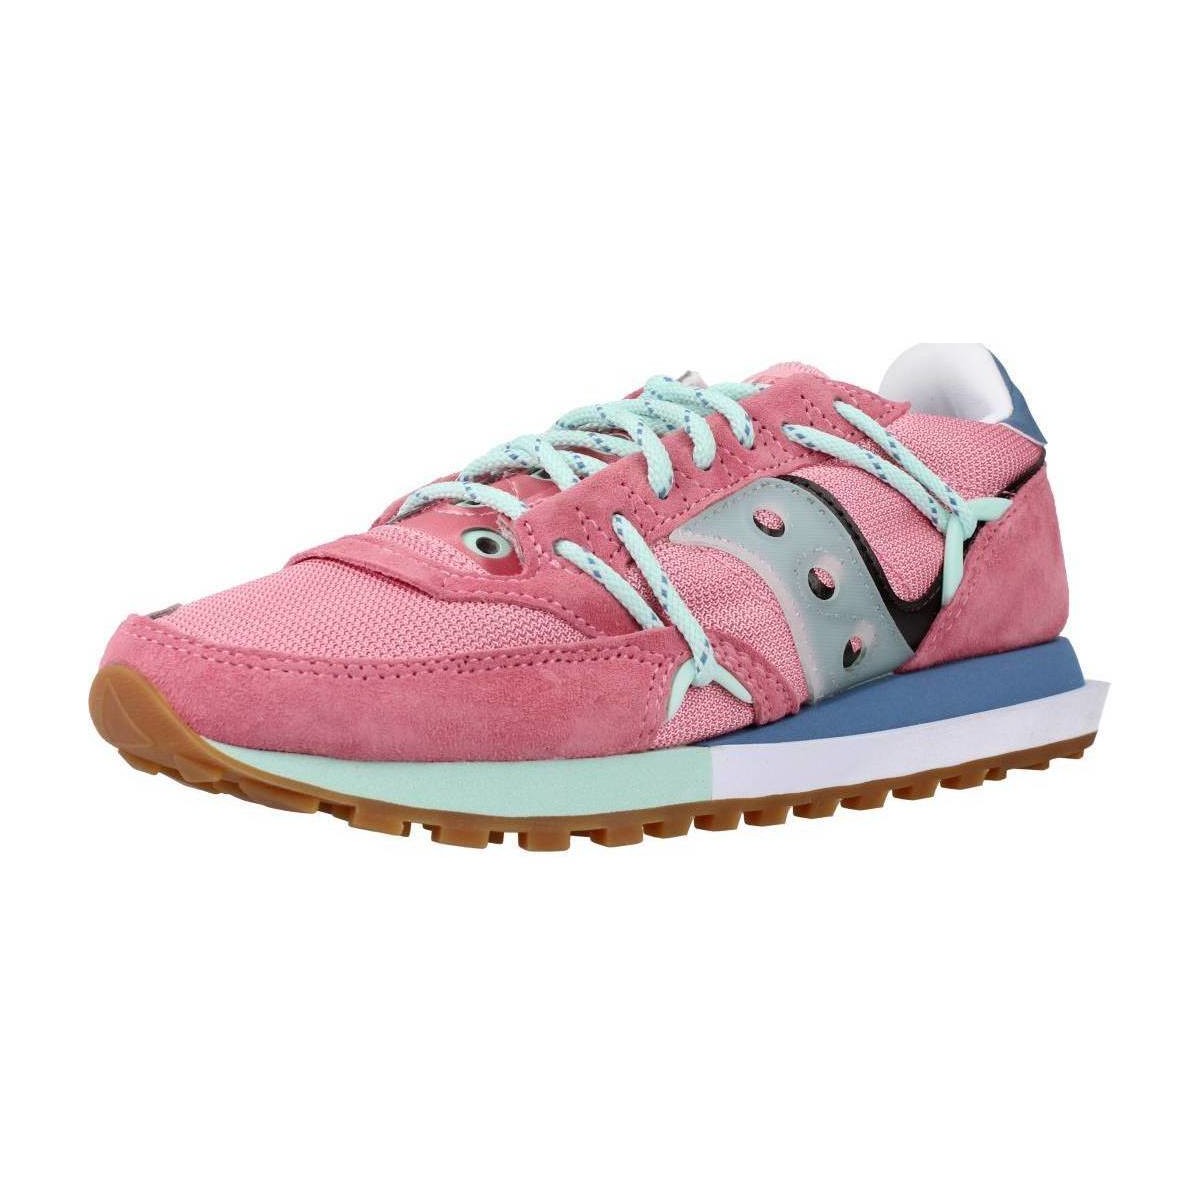 Chaussures Femme saucony endorphin speed chaussures running RSCSA JAZZ DST Rose